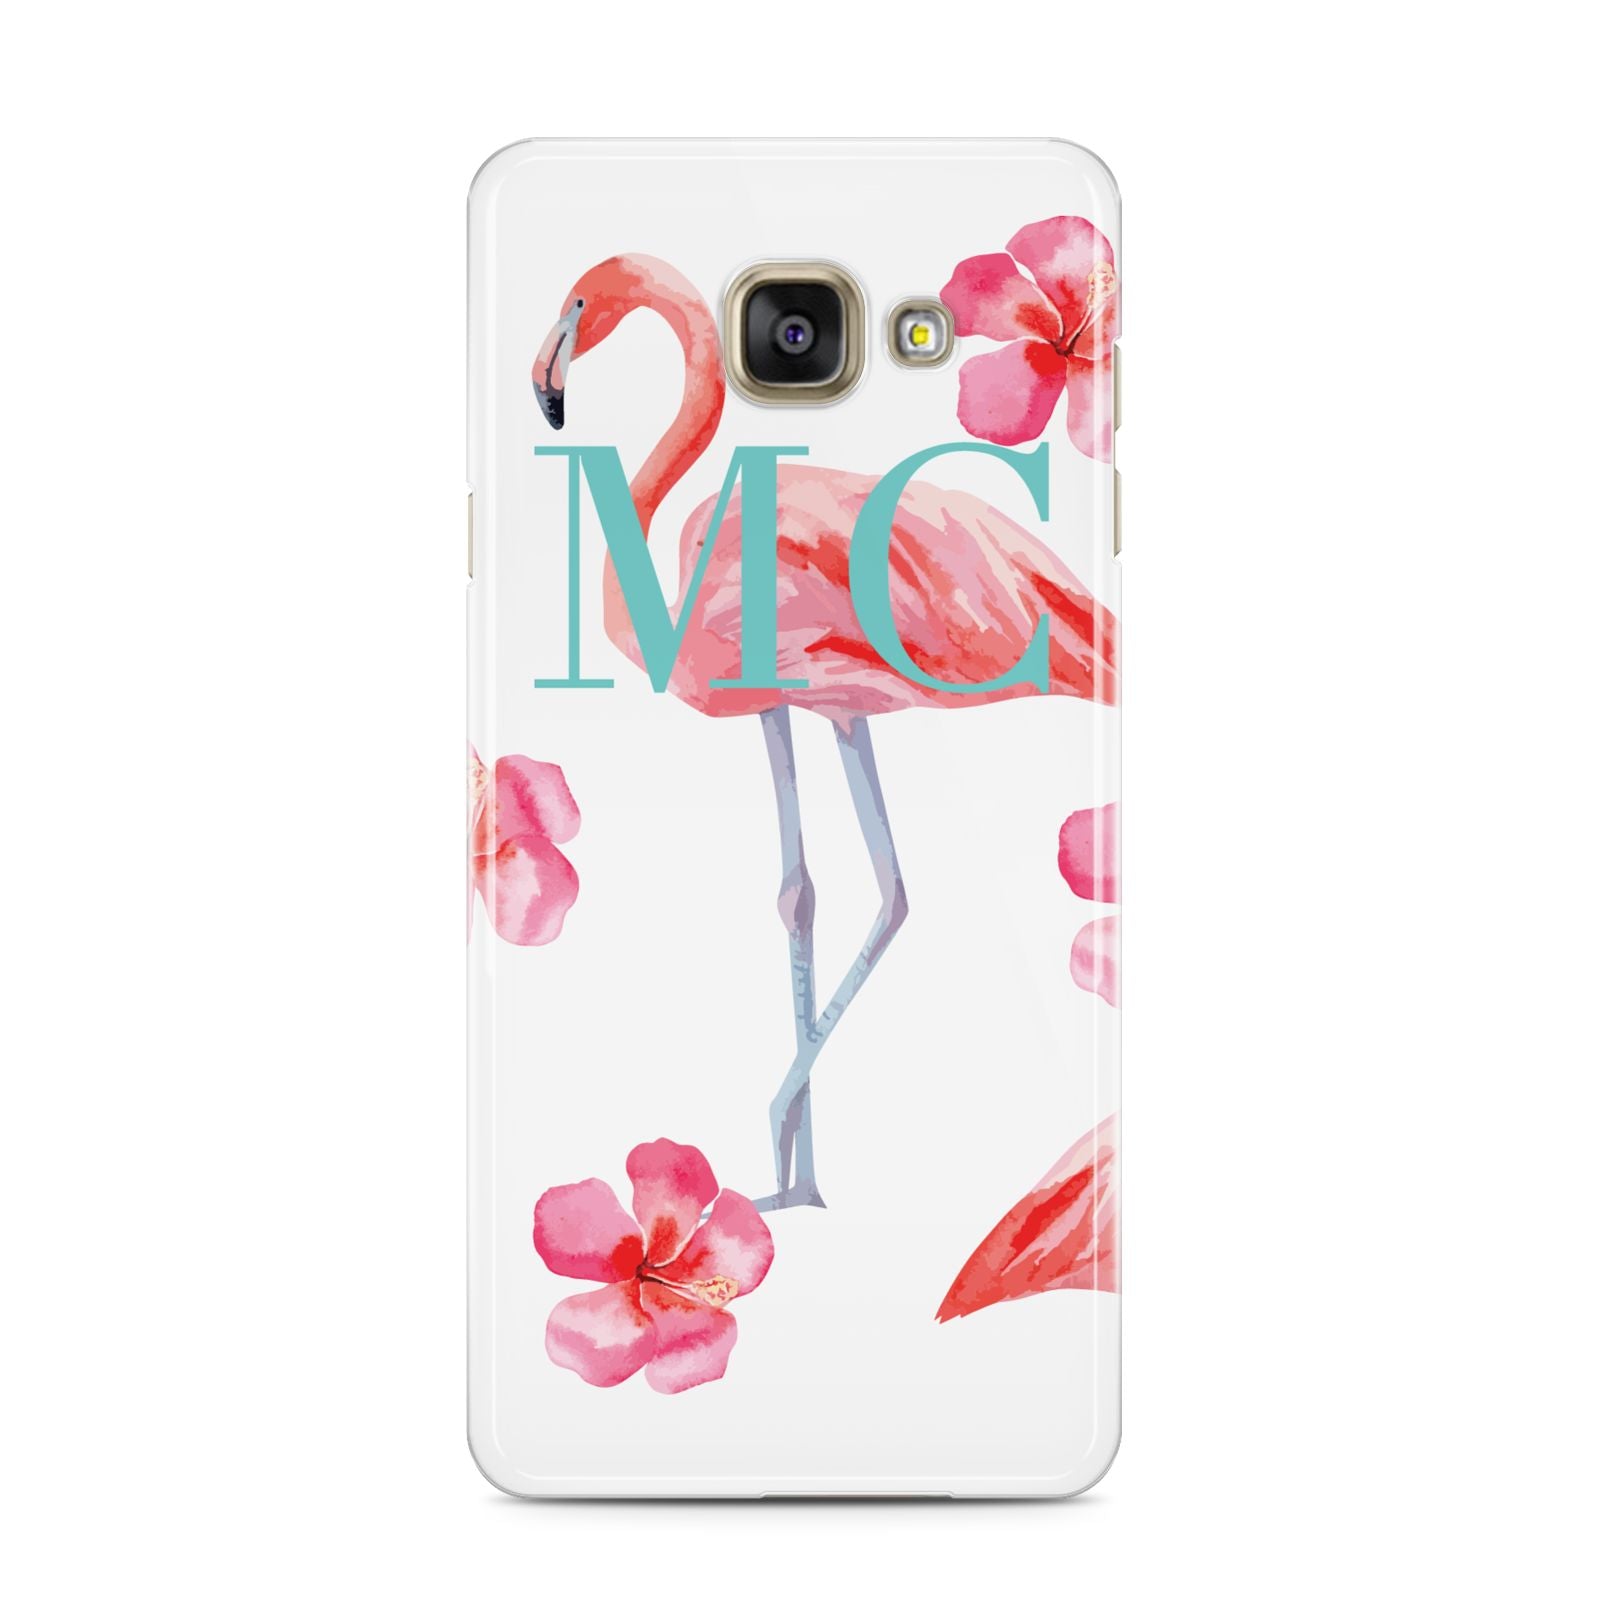 Personalised Initials Flamingo 3 Samsung Galaxy A3 2016 Case on gold phone